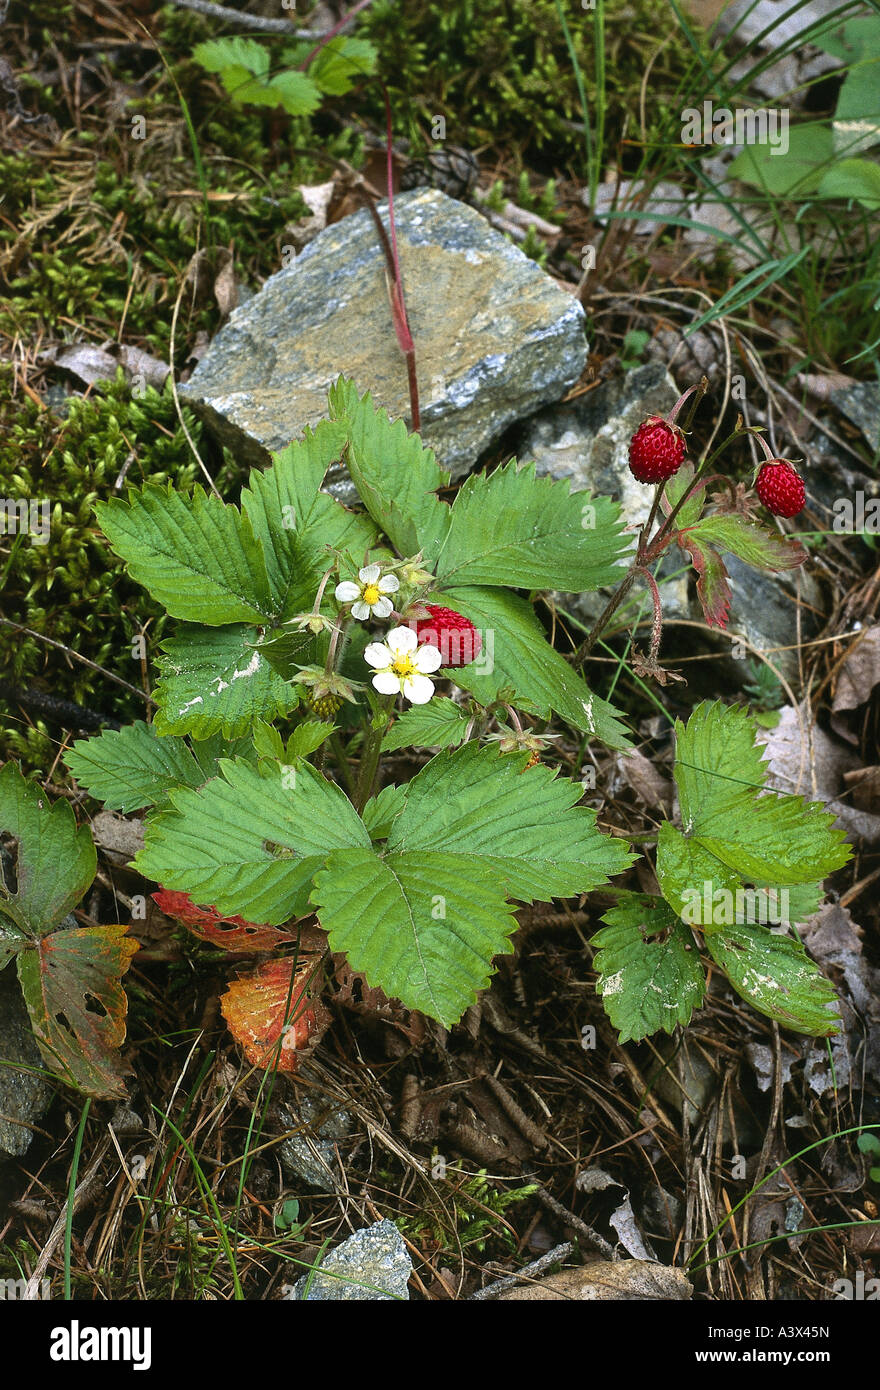 botany, Strawberry, (Fragaria), Woodland strawberries, (Fragaria vesca), mellow, blossom, at plant, fruit, fruits, red, mellow, Stock Photo